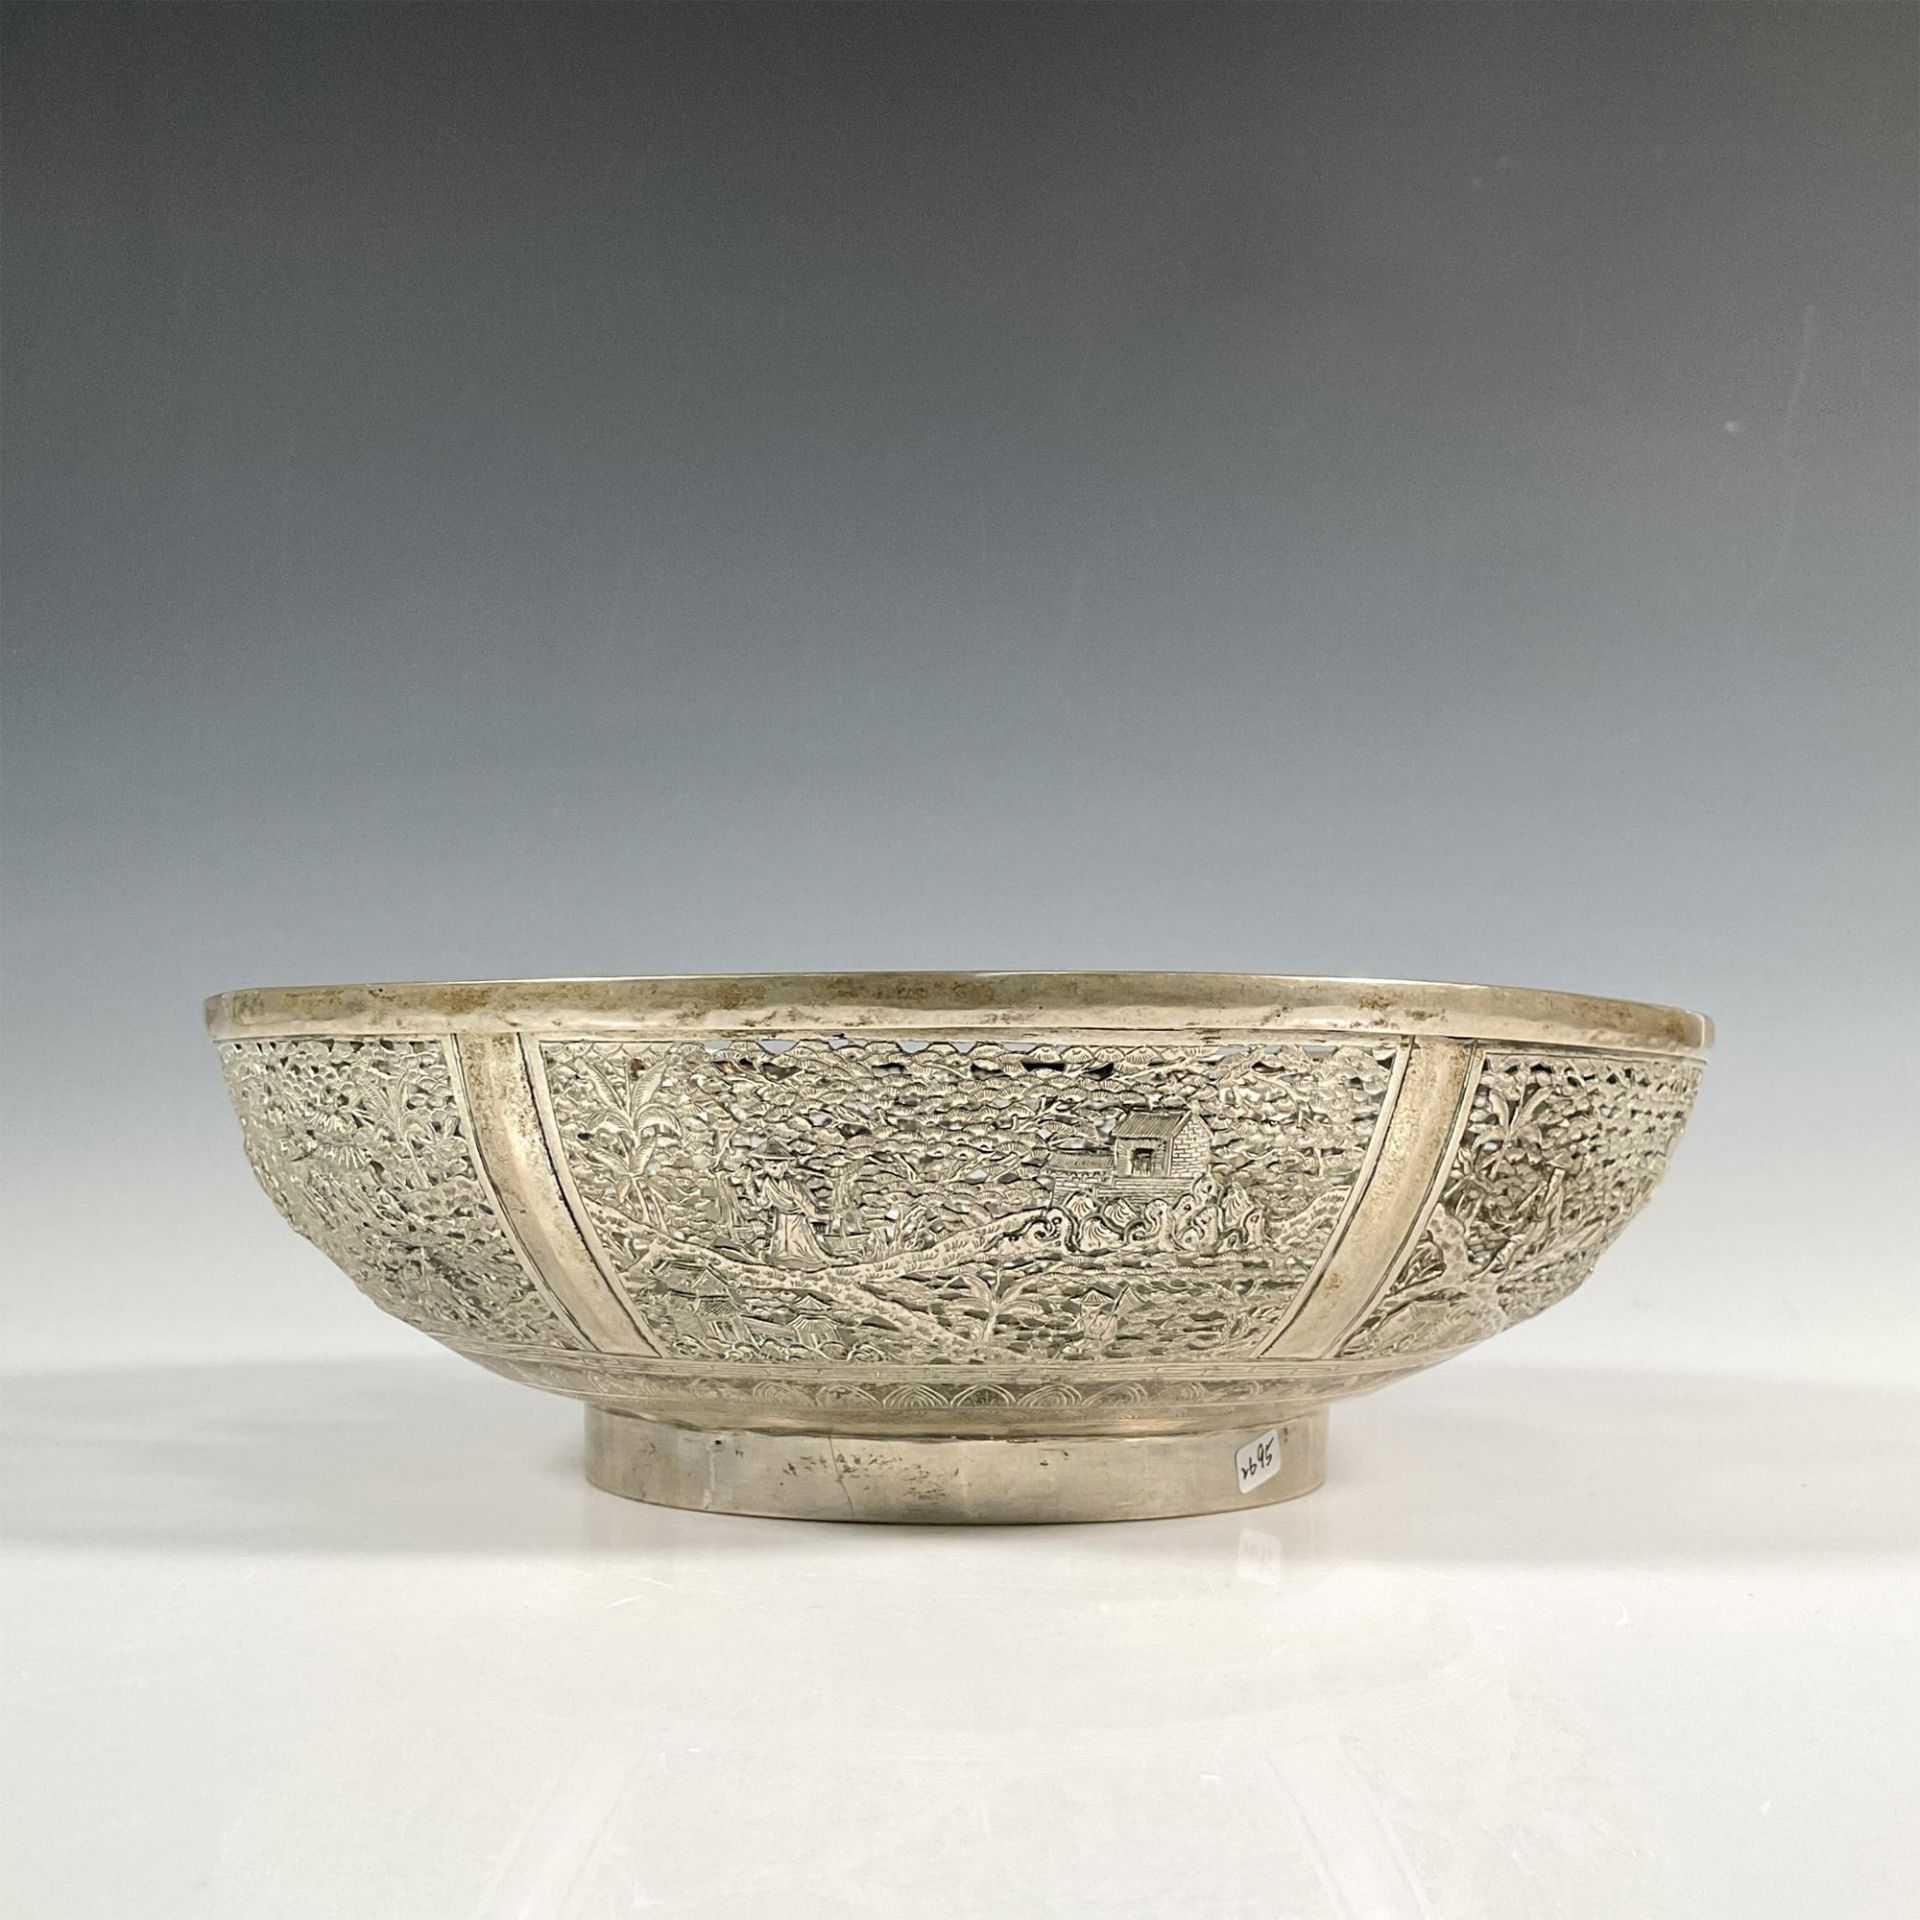 Asian Silver Decorative Pierced Bowl - Image 5 of 6